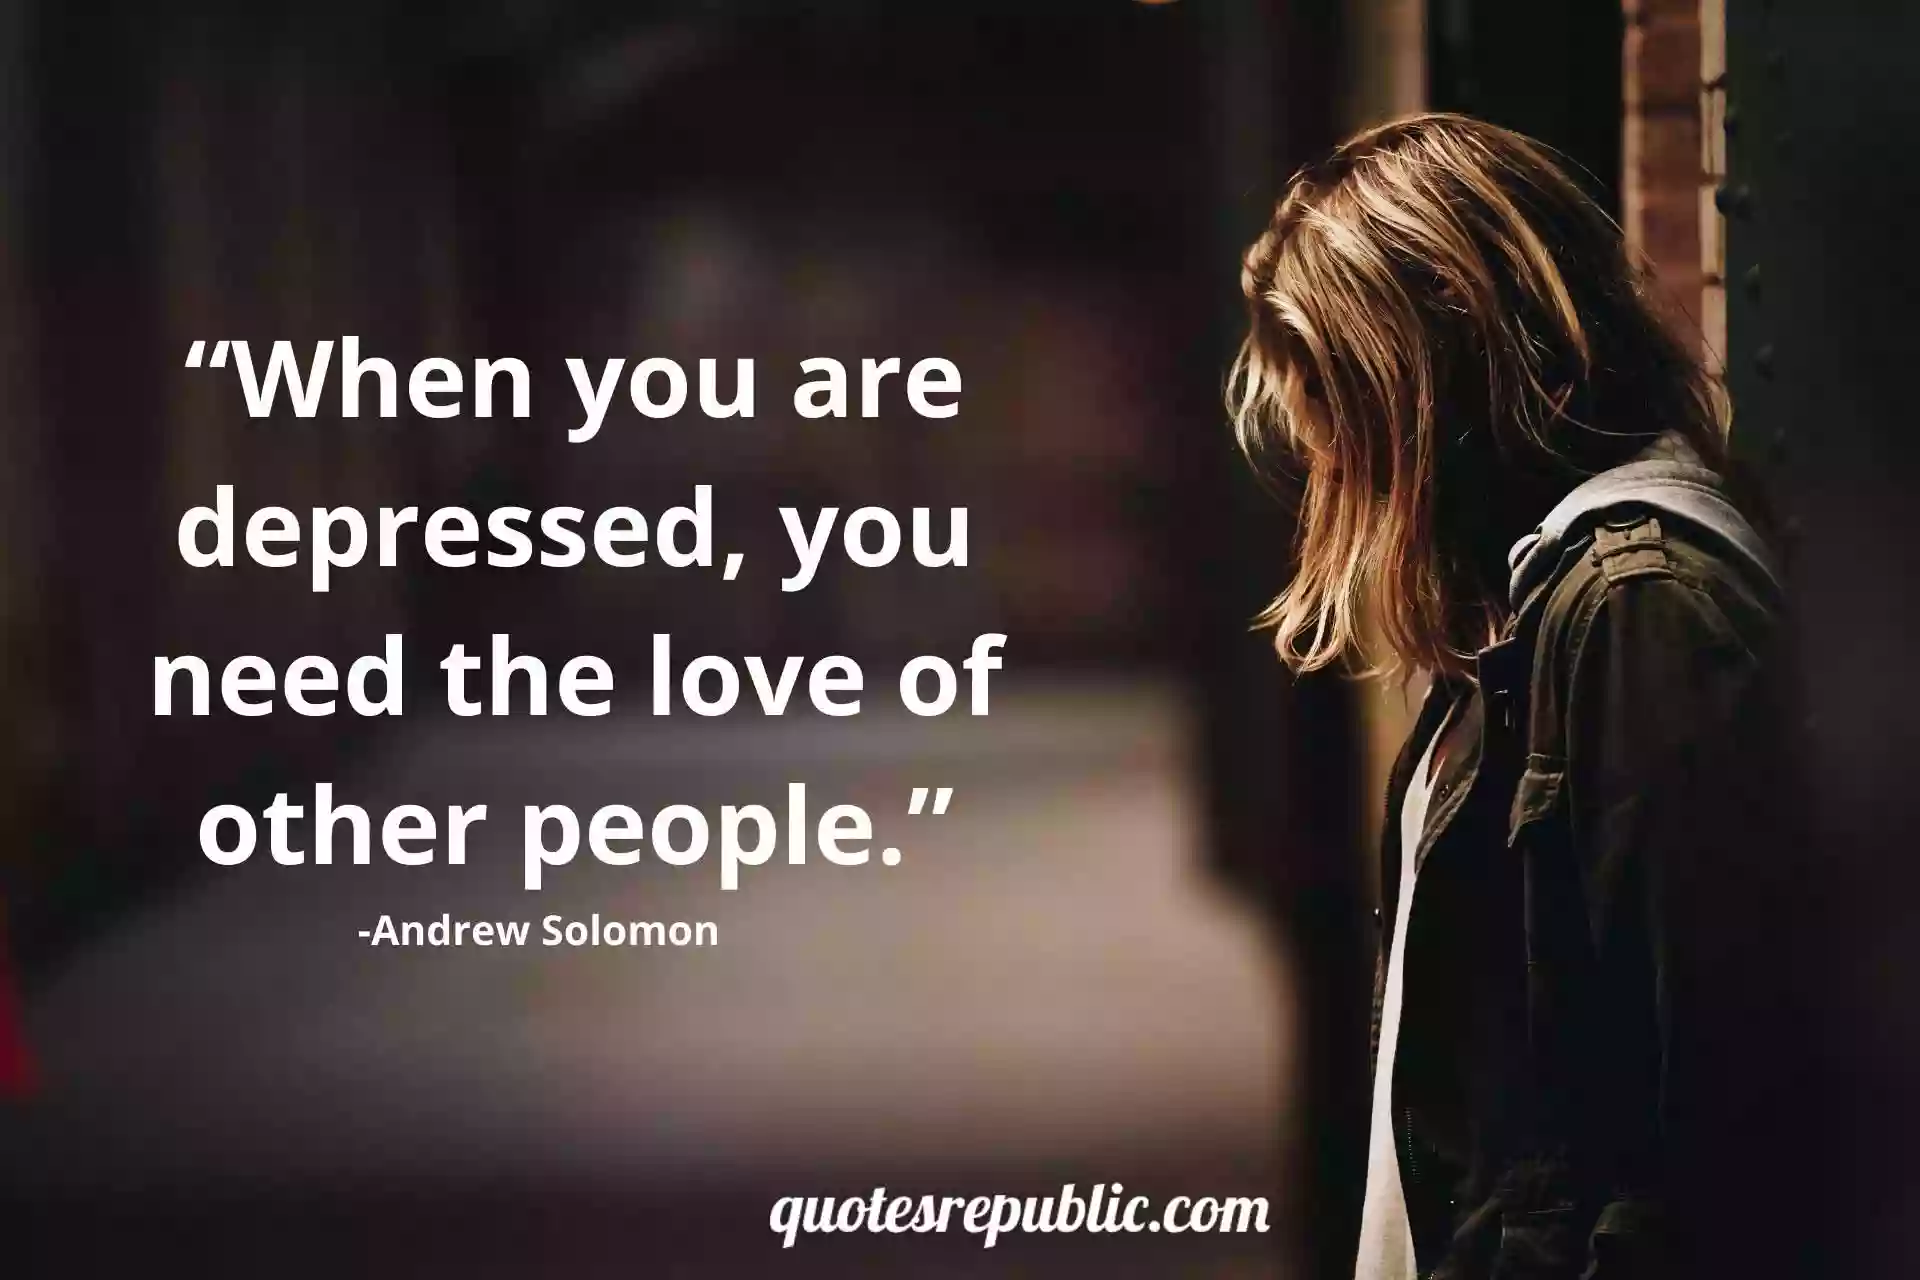 Top 40 Depression Motivational Quotes With Images - Republic Quote